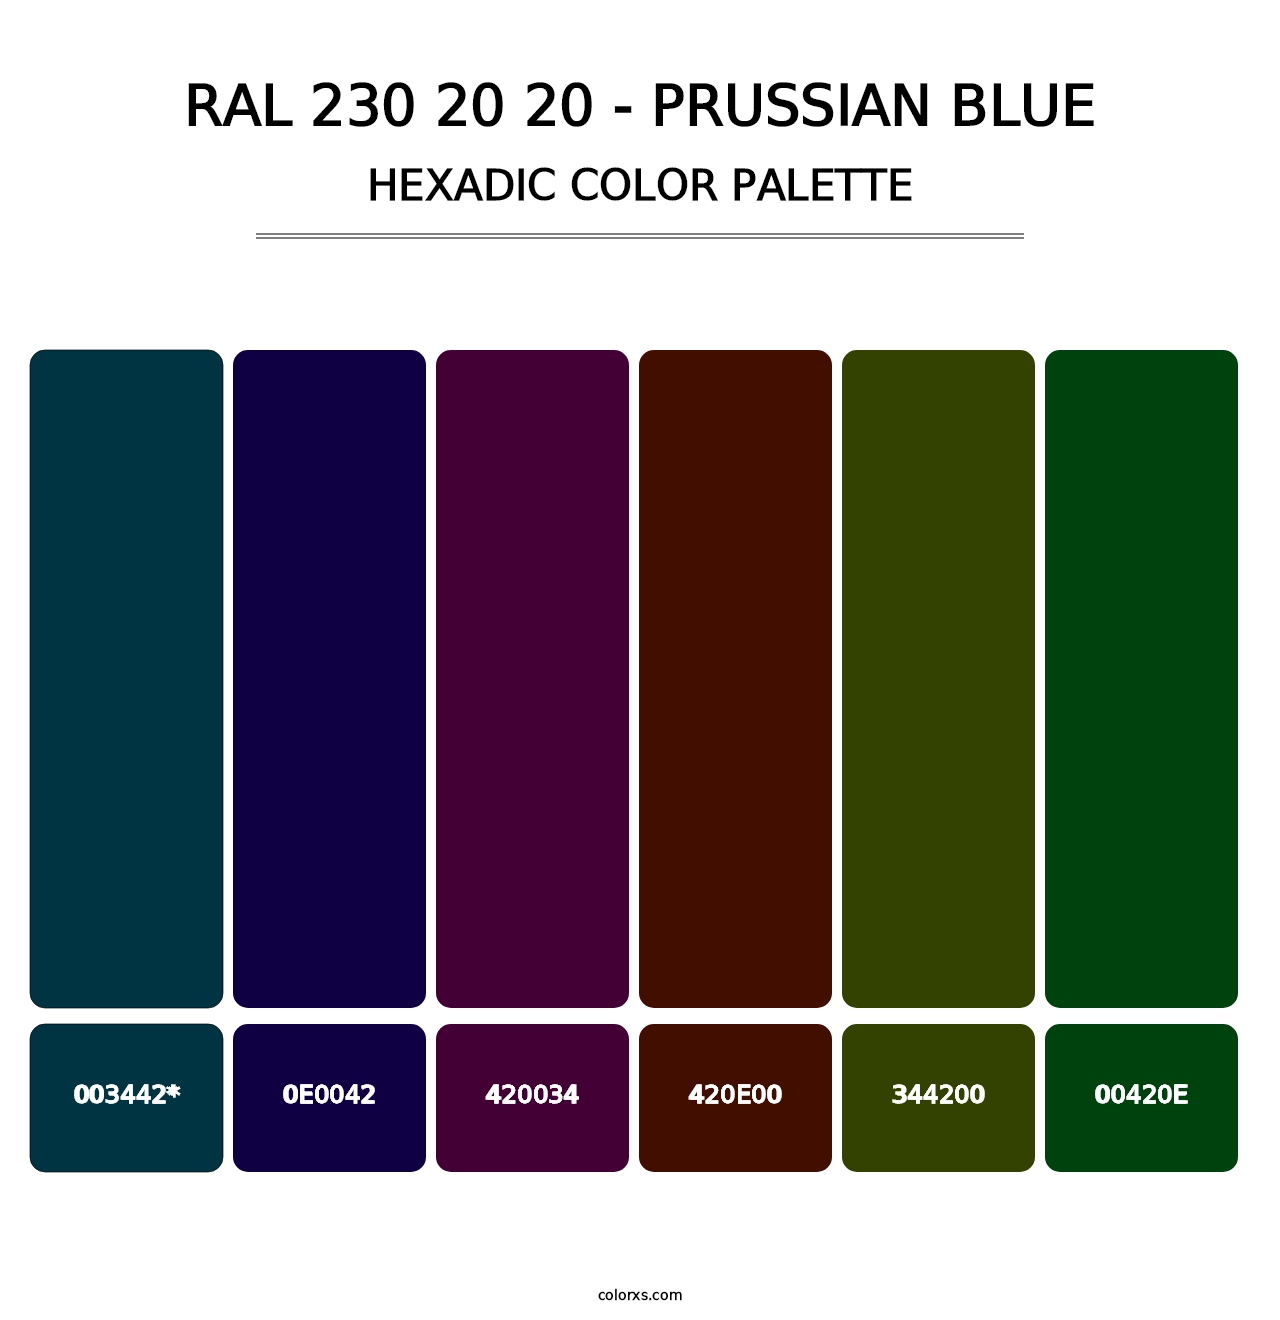 RAL 230 20 20 - Prussian Blue - Hexadic Color Palette